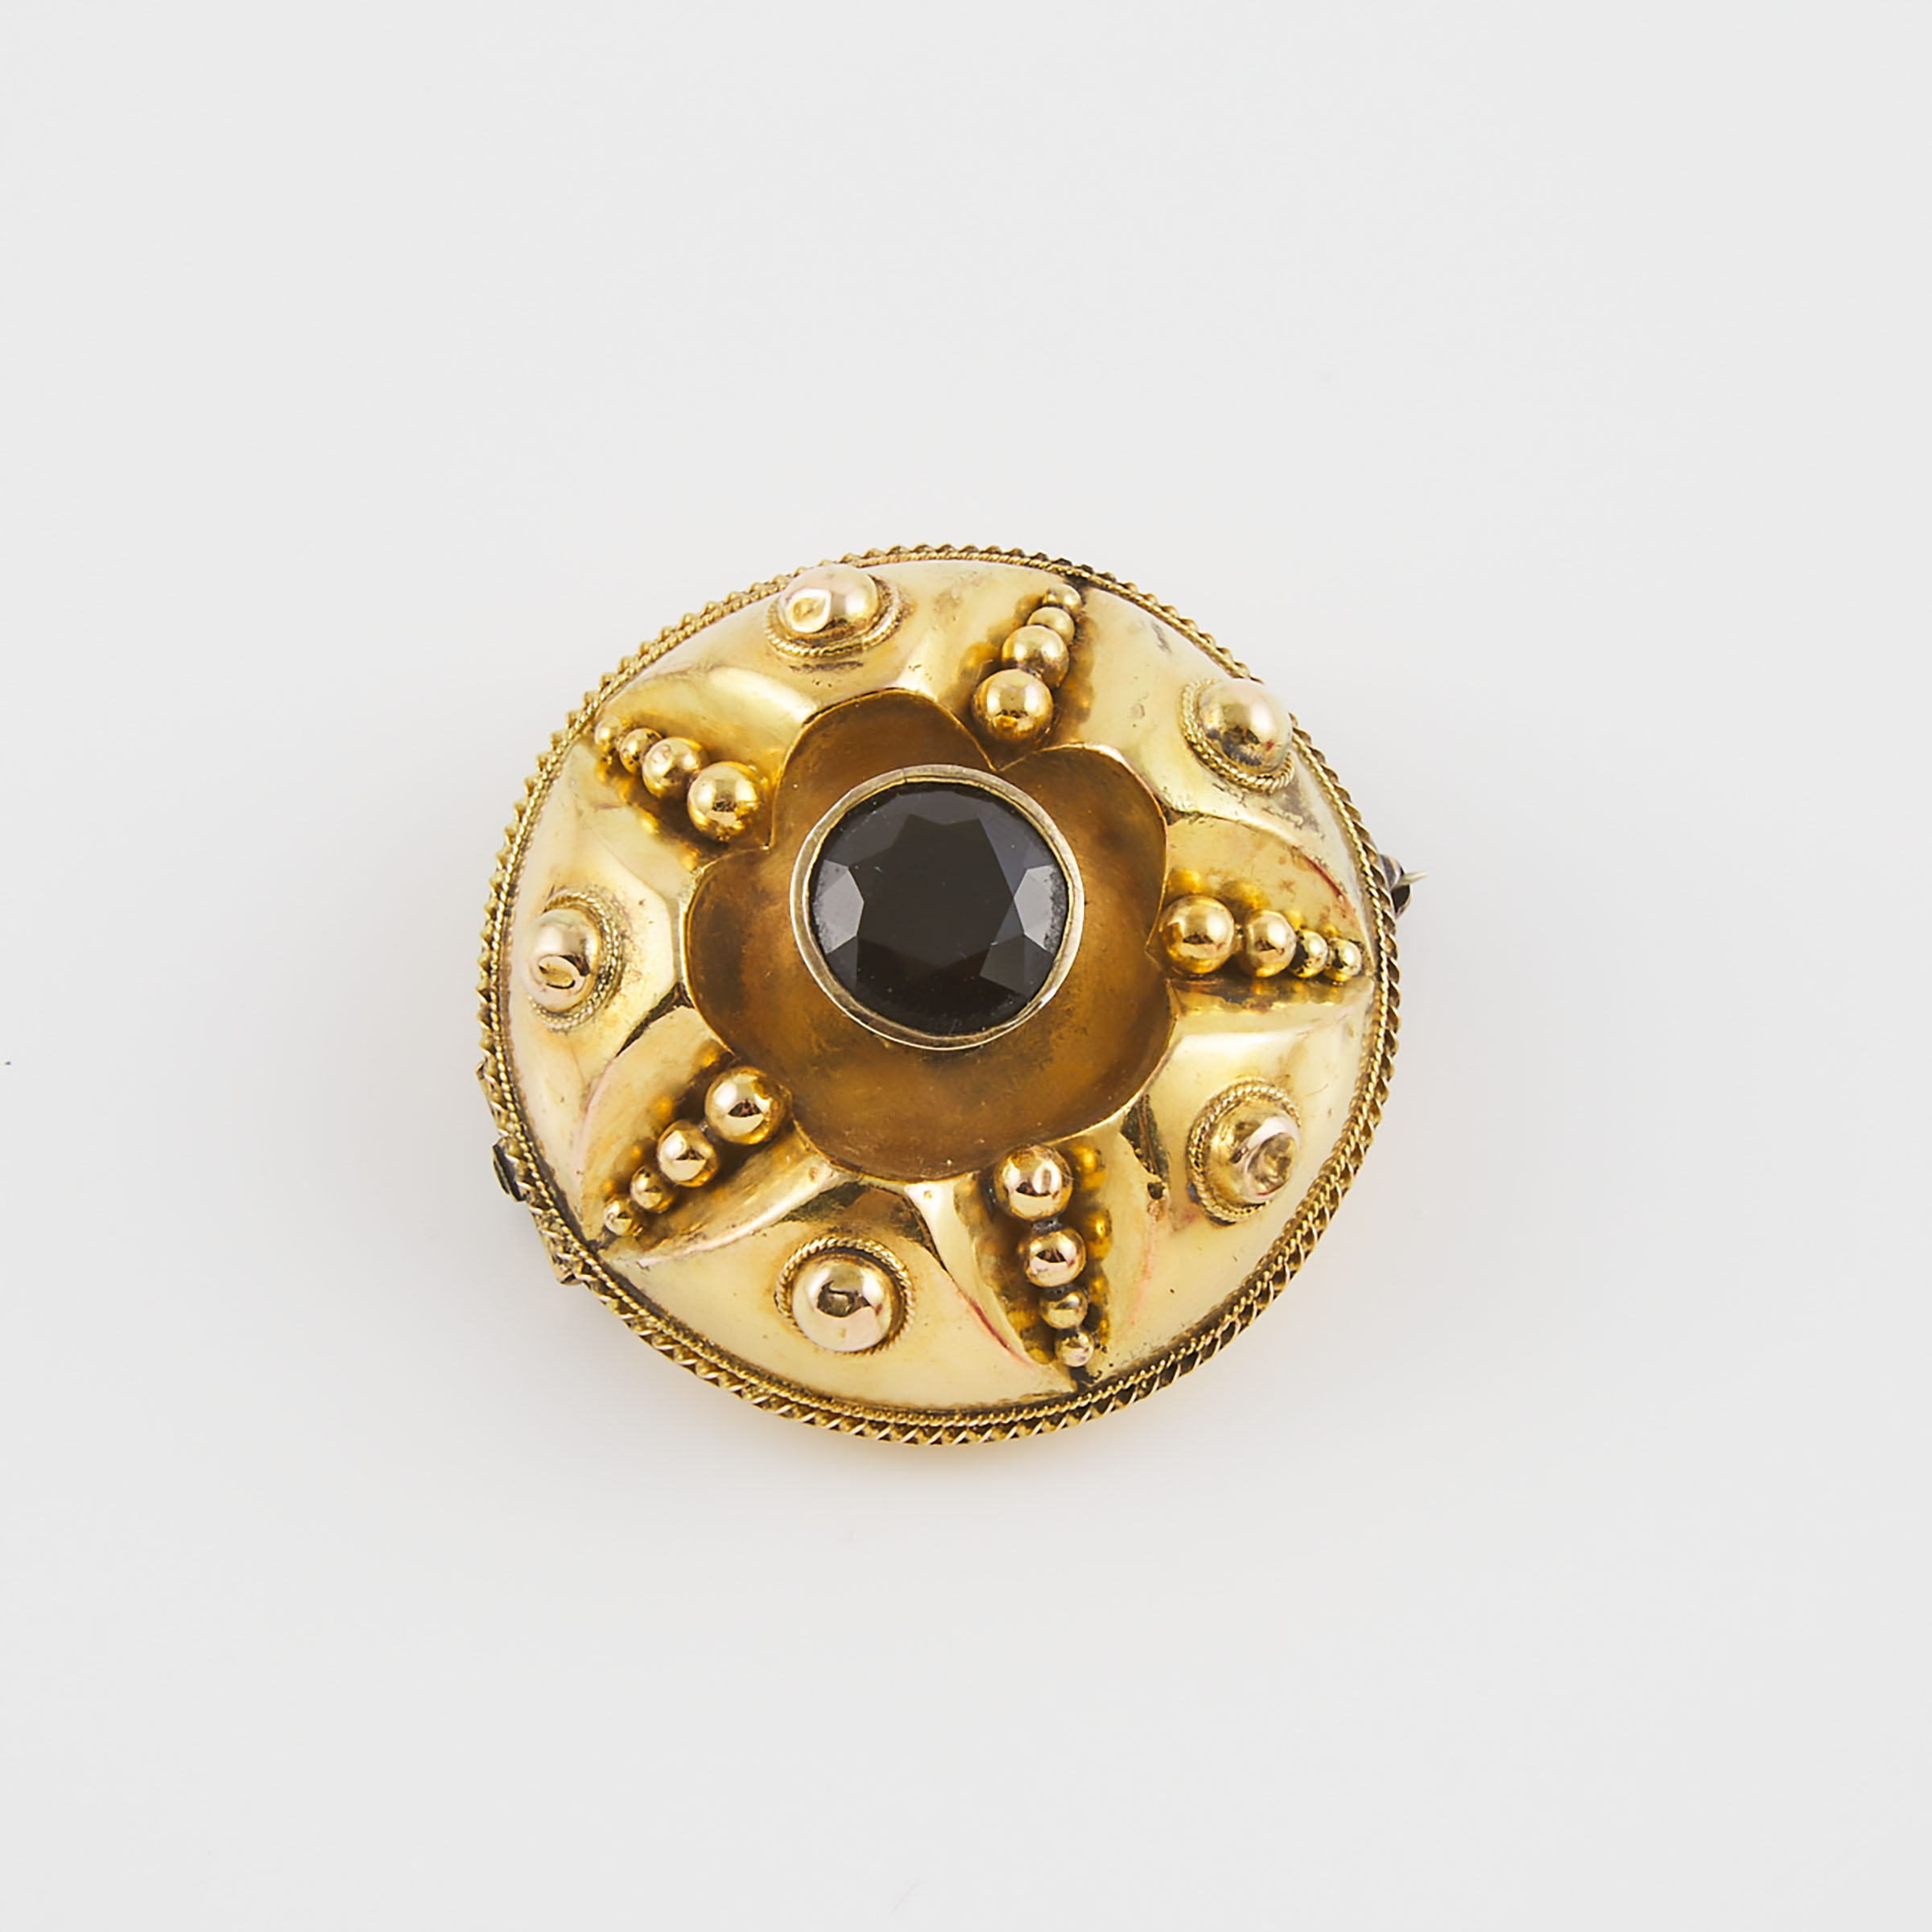 19th Century 14k Yellow Gold And Gold-Filled Brooch 